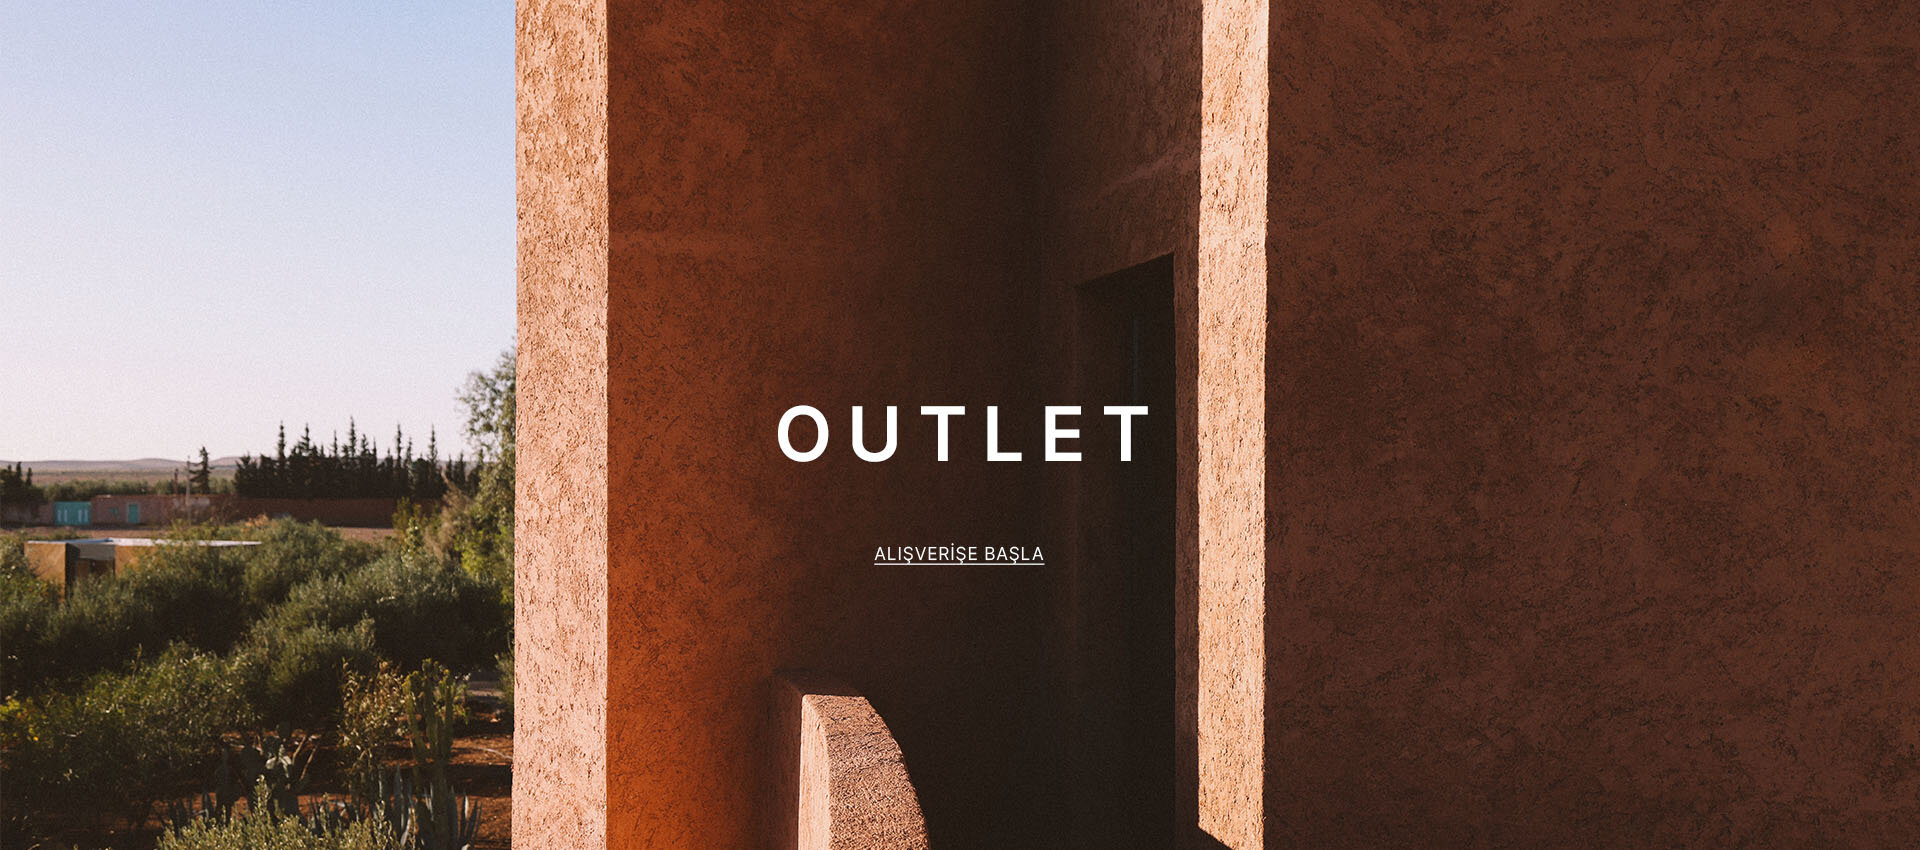 Outlet
